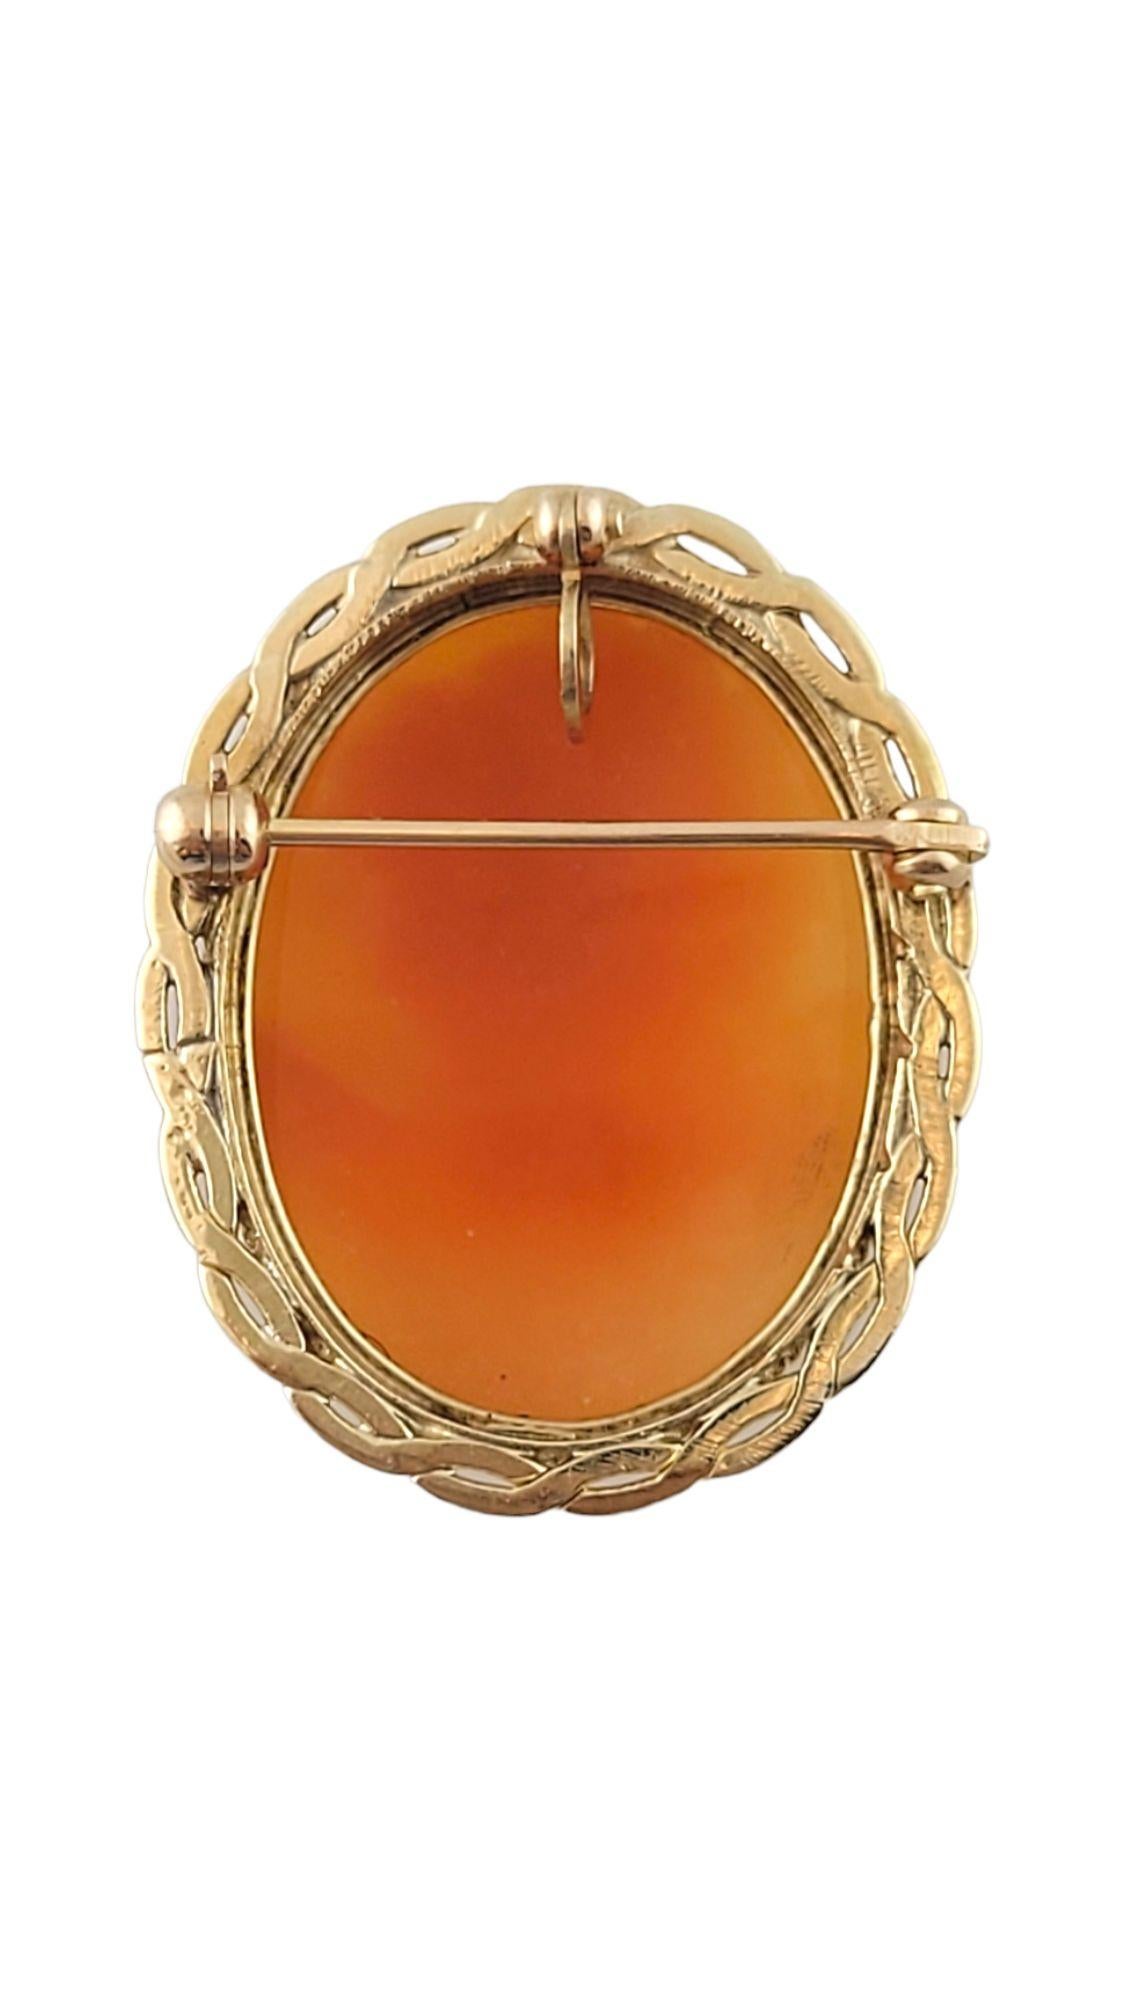 14K Yellow Gold Cameo Pin/Pendant #14567 In Good Condition For Sale In Washington Depot, CT